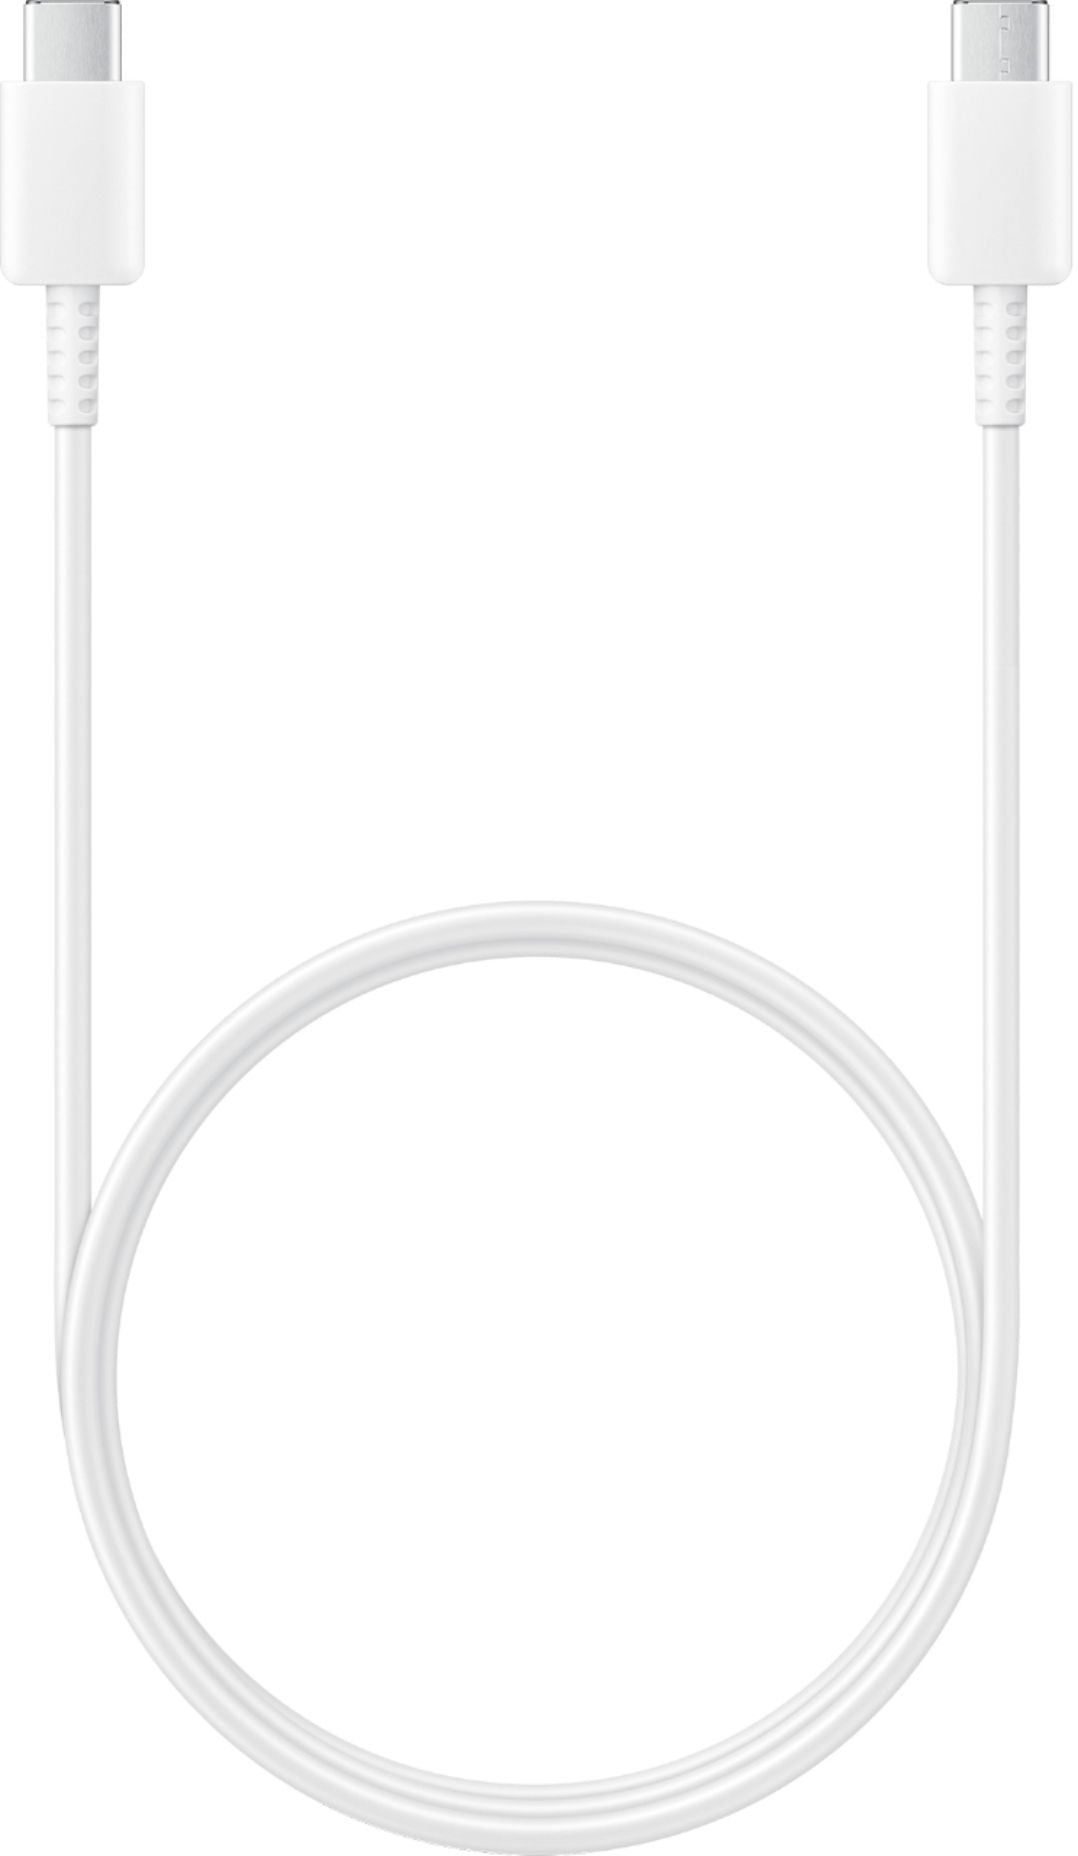 SAMSUNG - 1M USB TYPE C-TO-USB TYPE-C CHARGE-AND-SYNC CABLE - WHITE